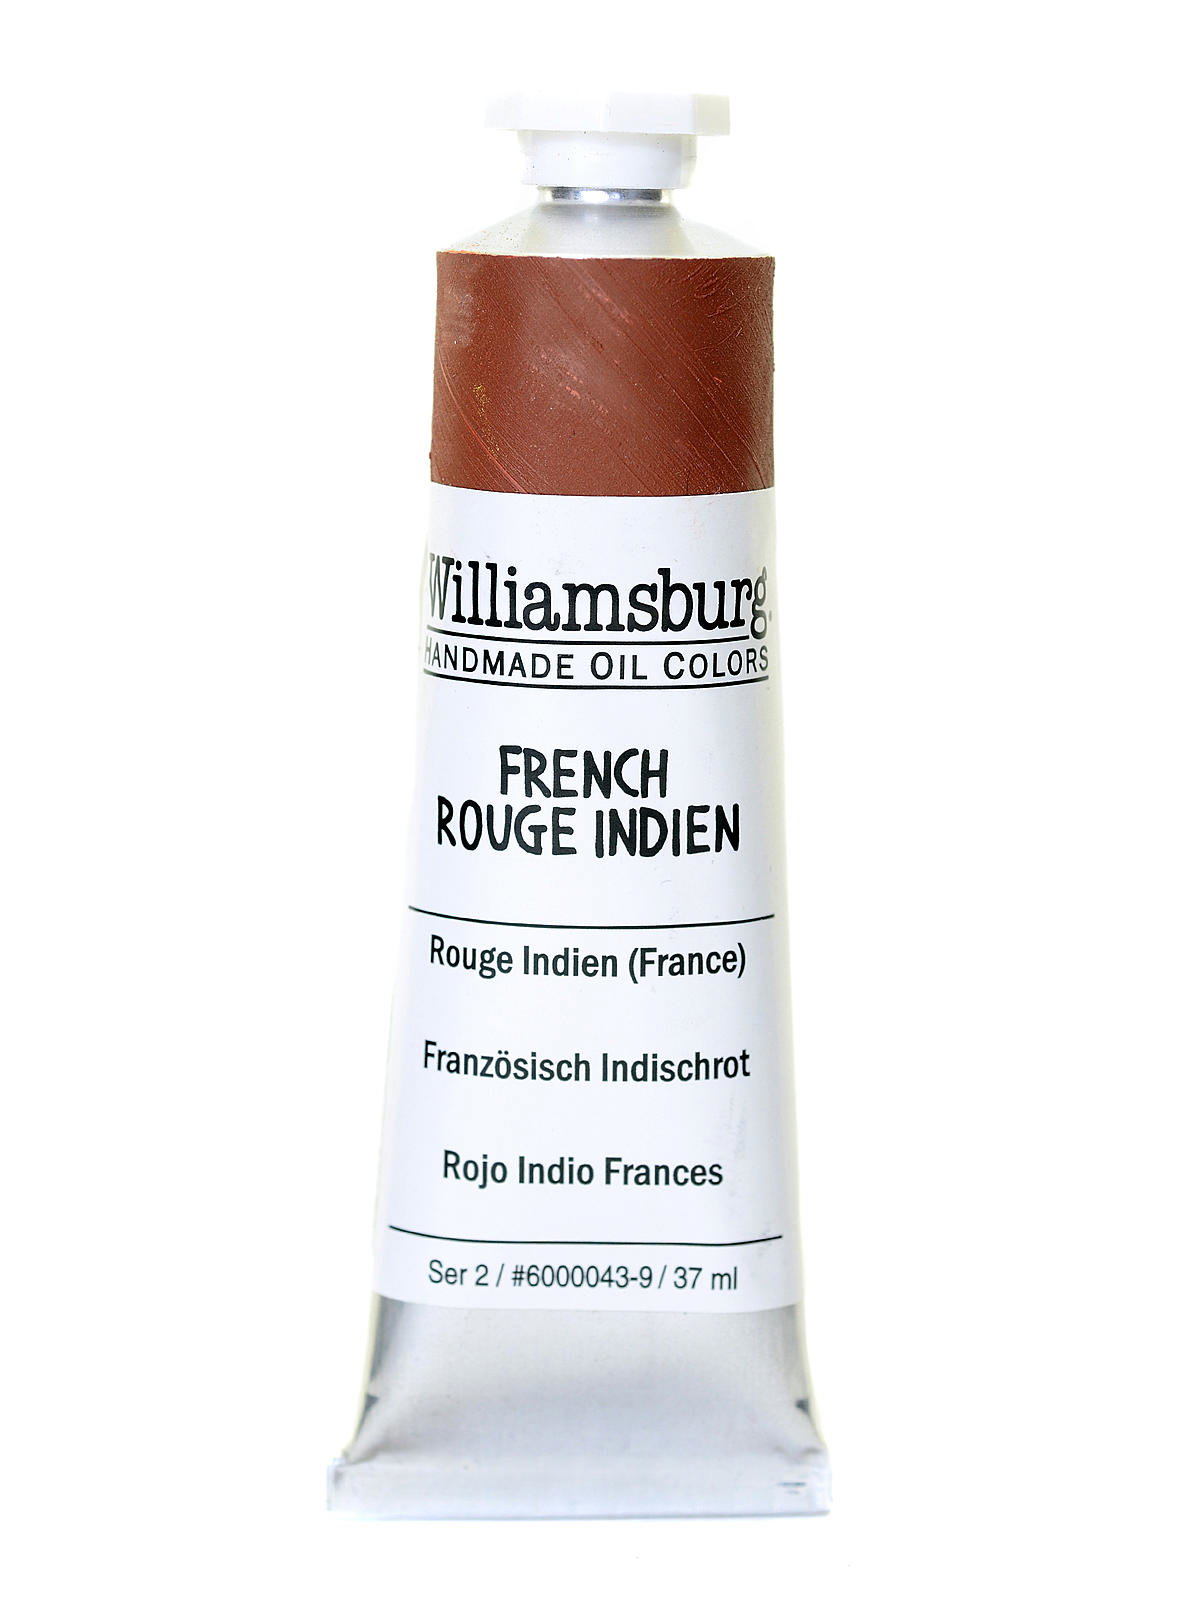 French Rouge Indien